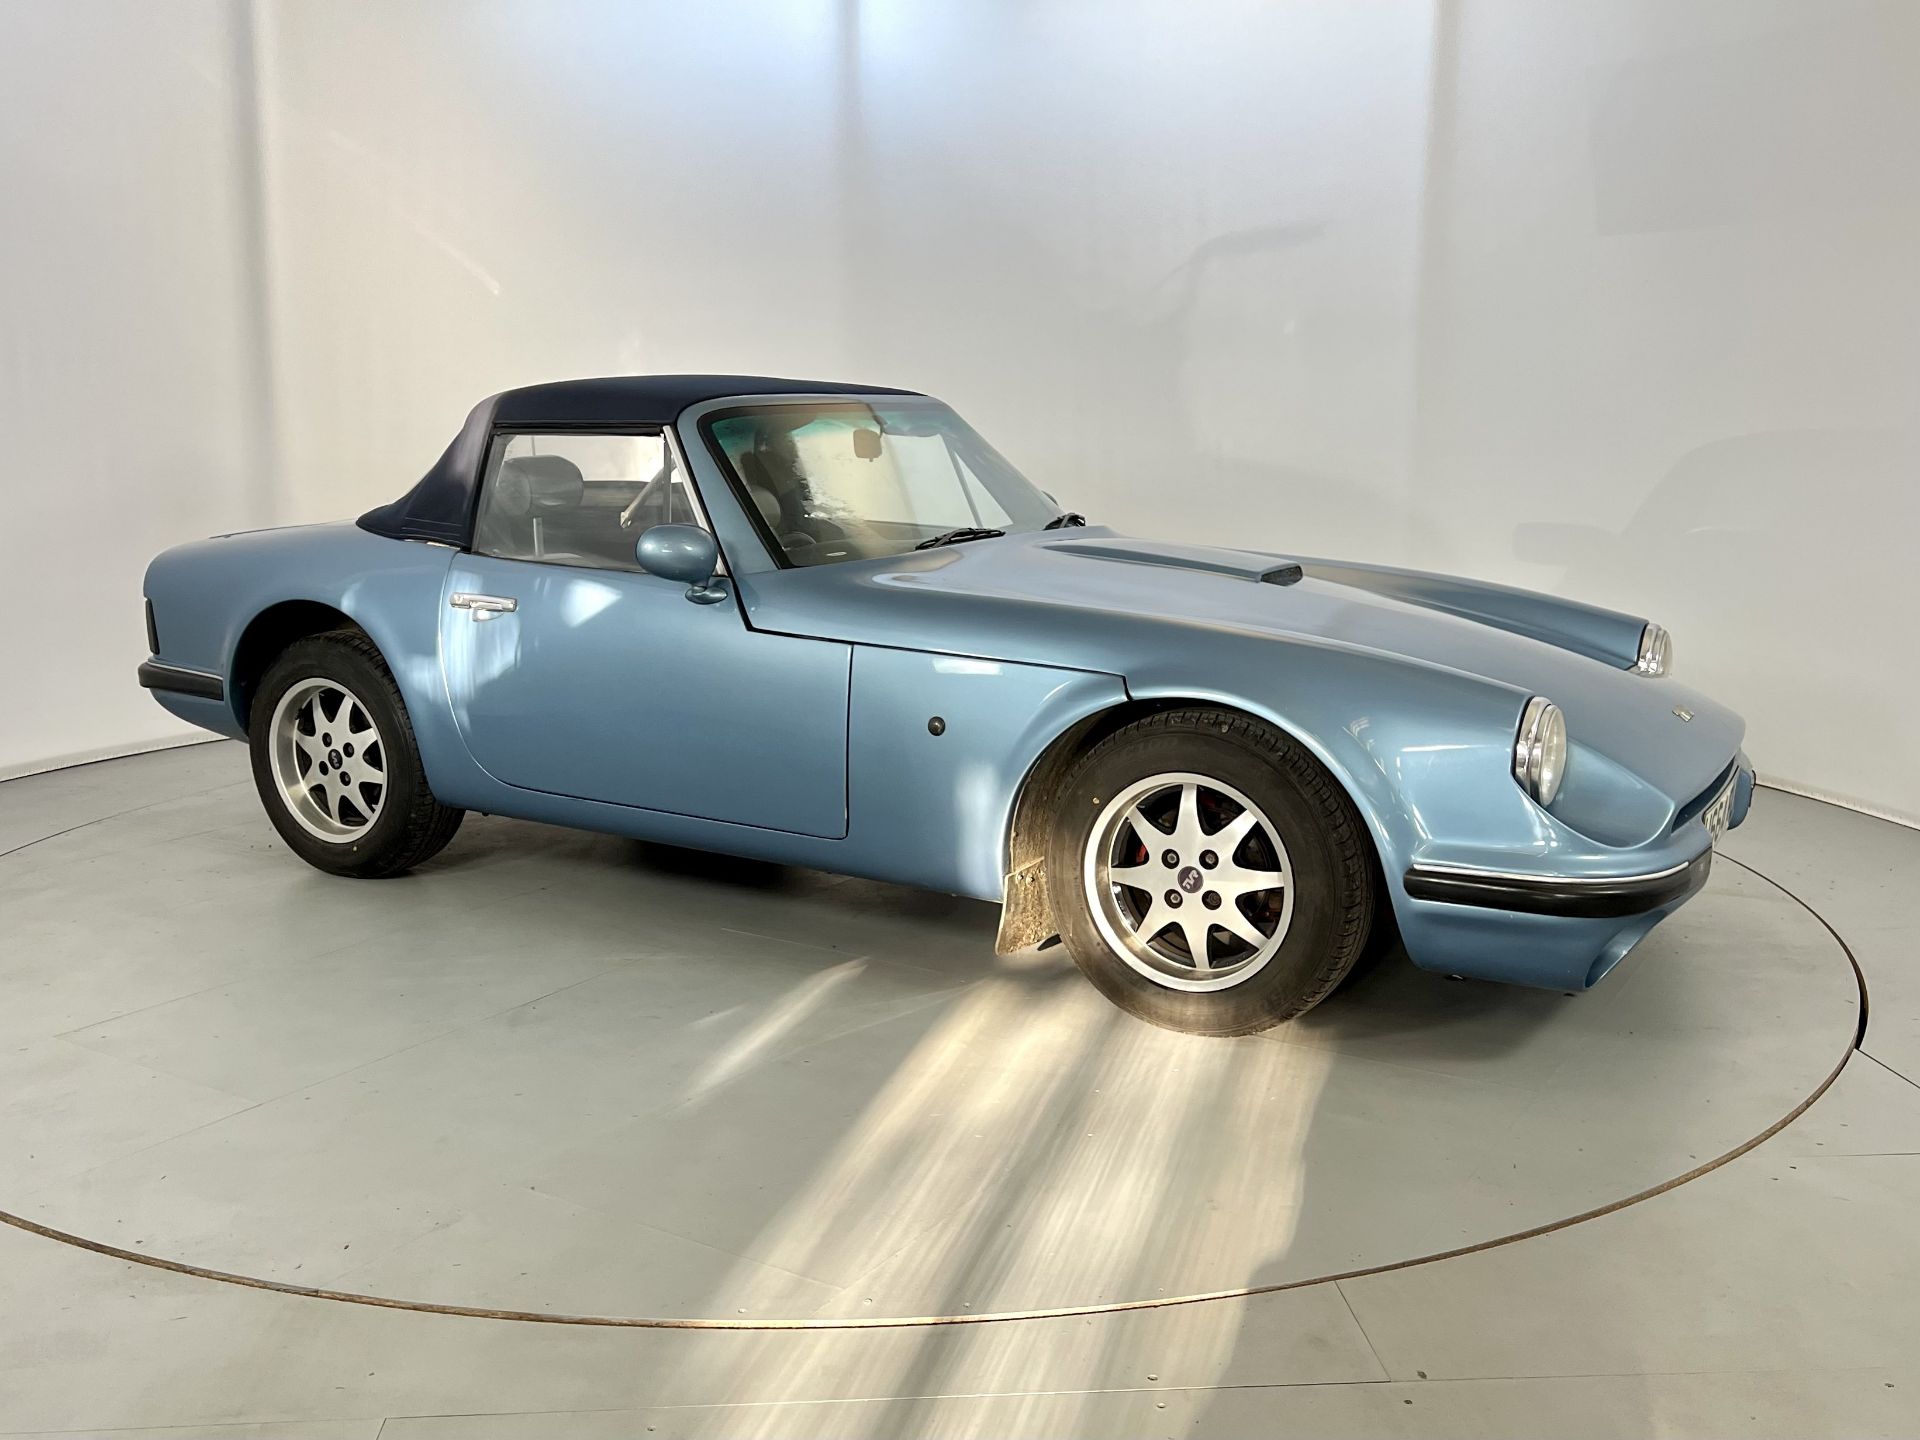 TVR S2 - Image 12 of 29